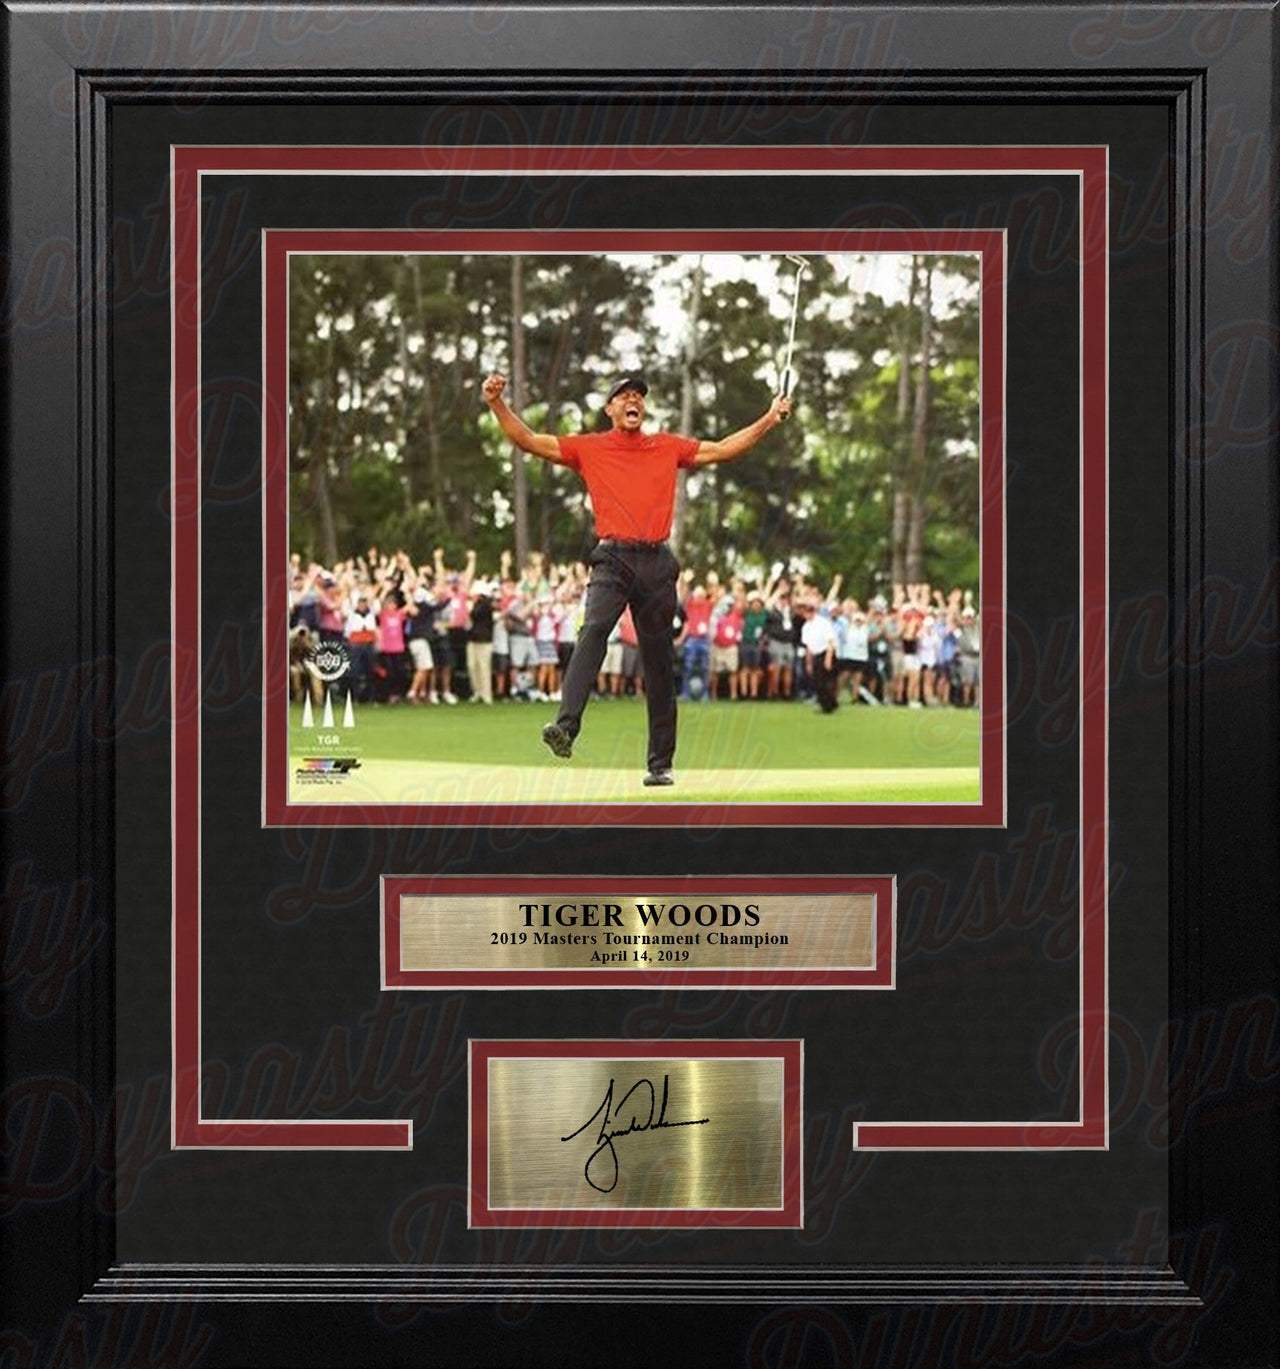 Tiger Woods 2019 Masters Champion 8" x 10" Framed Horizontal Golf Photo with Engraved Autograph